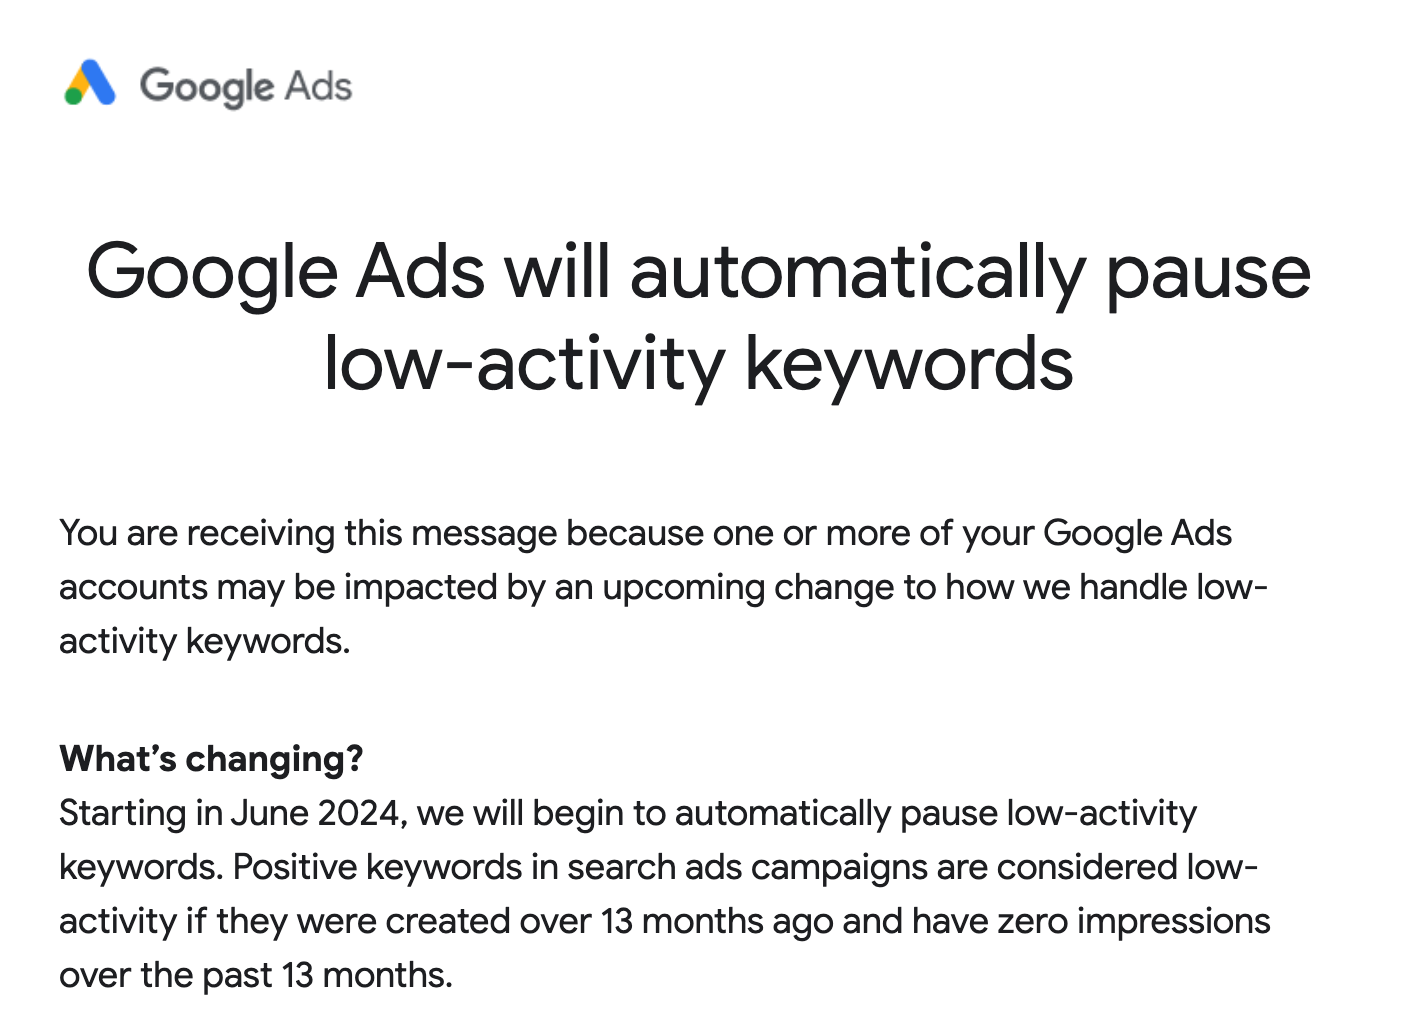 A screenshot of an email from Google Ads to customers announcing that it will automatically pause low-activity keywords